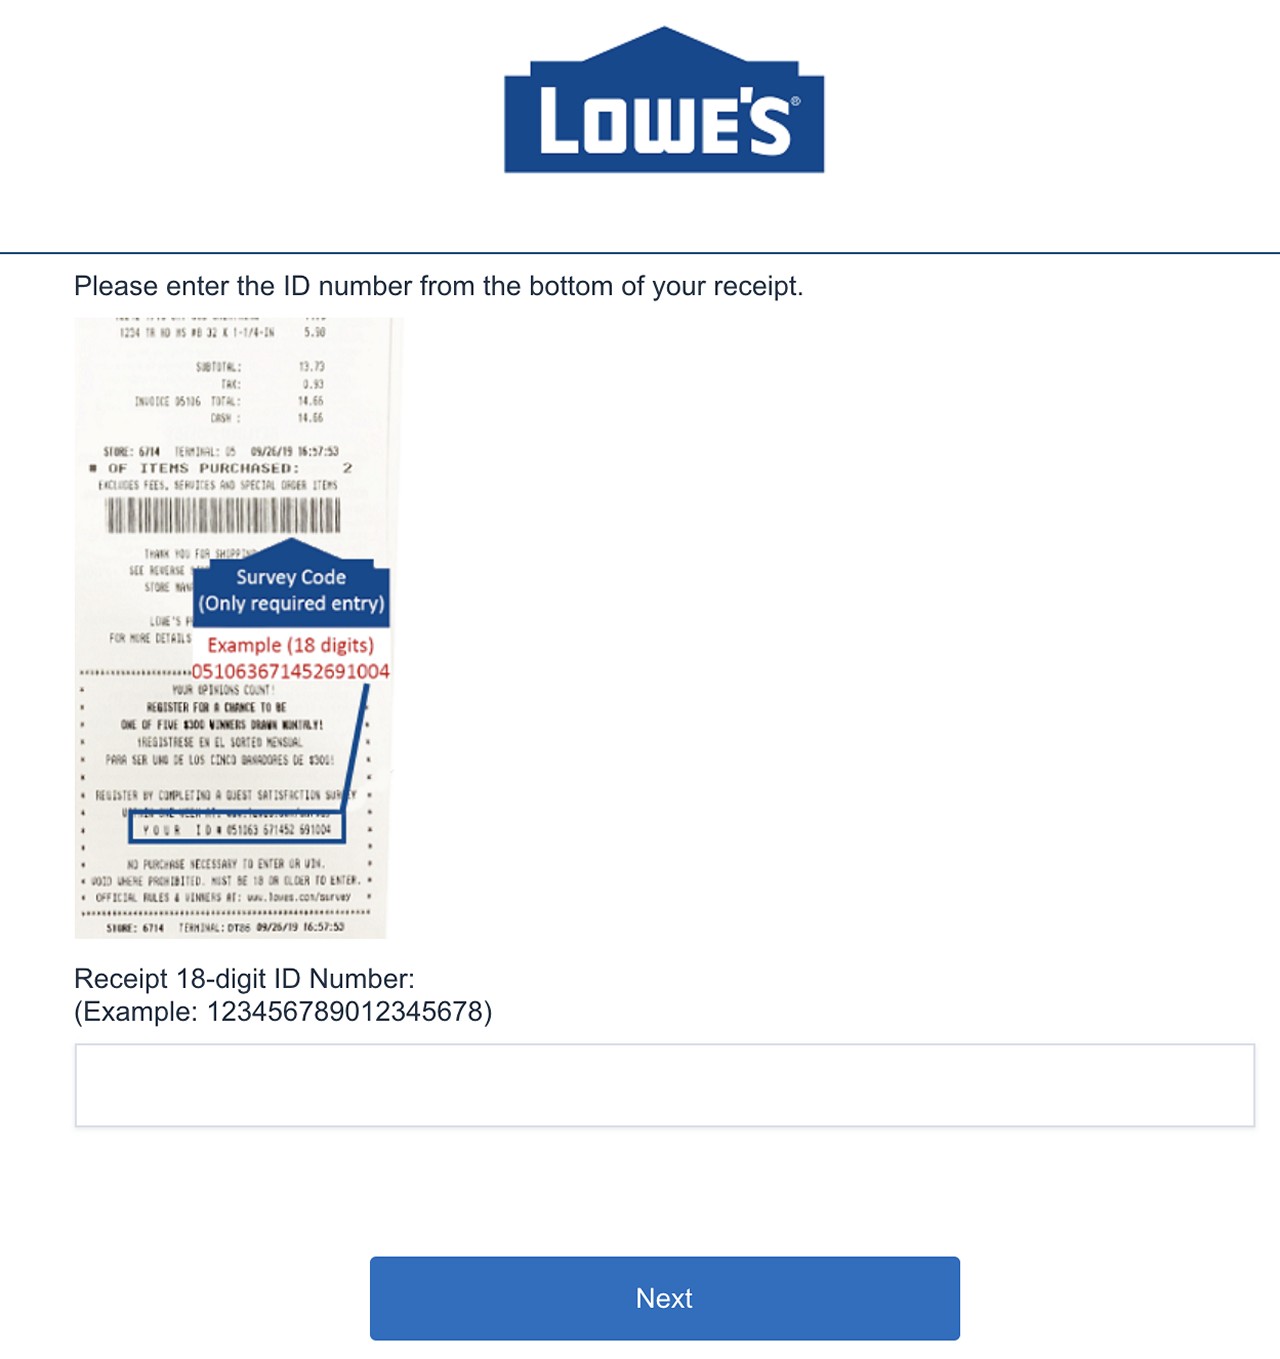 www-lowes-survey-get-a-500-check